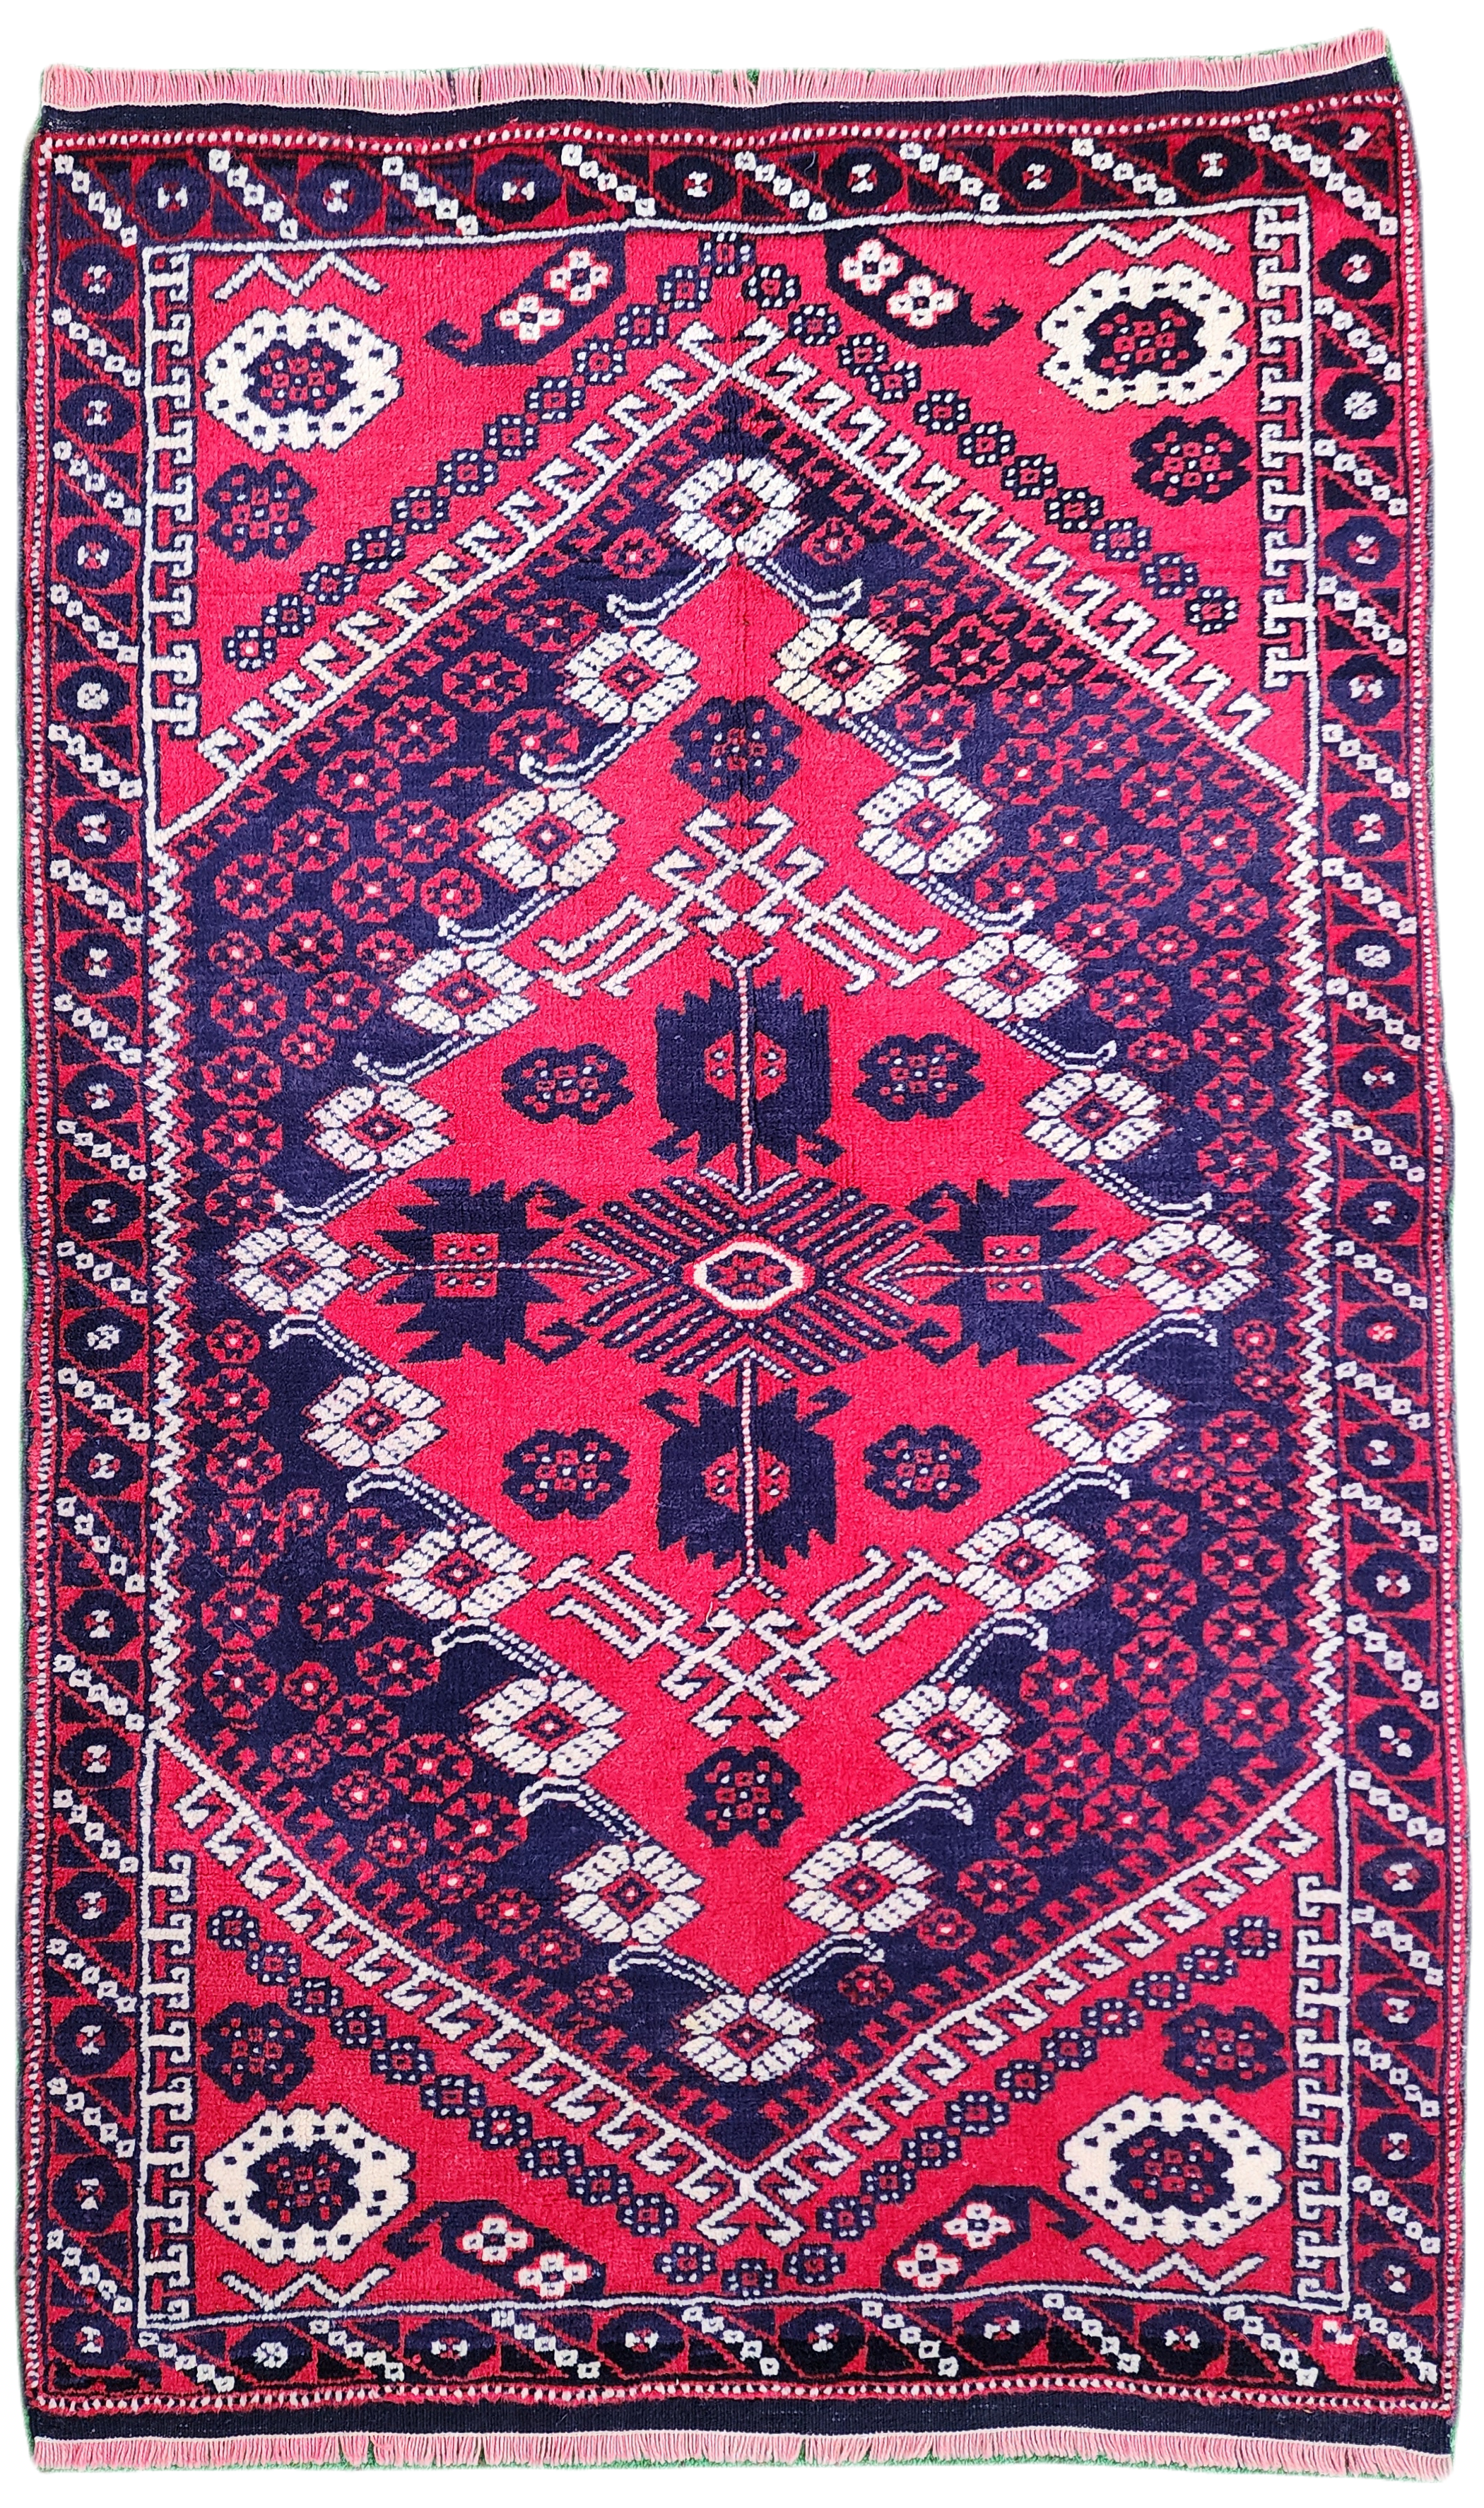 Antique Turkish Bergama Prayer Rug, 4 ft 8 in x 3 ft, Red, Blue and Beige Prayer Style Rug